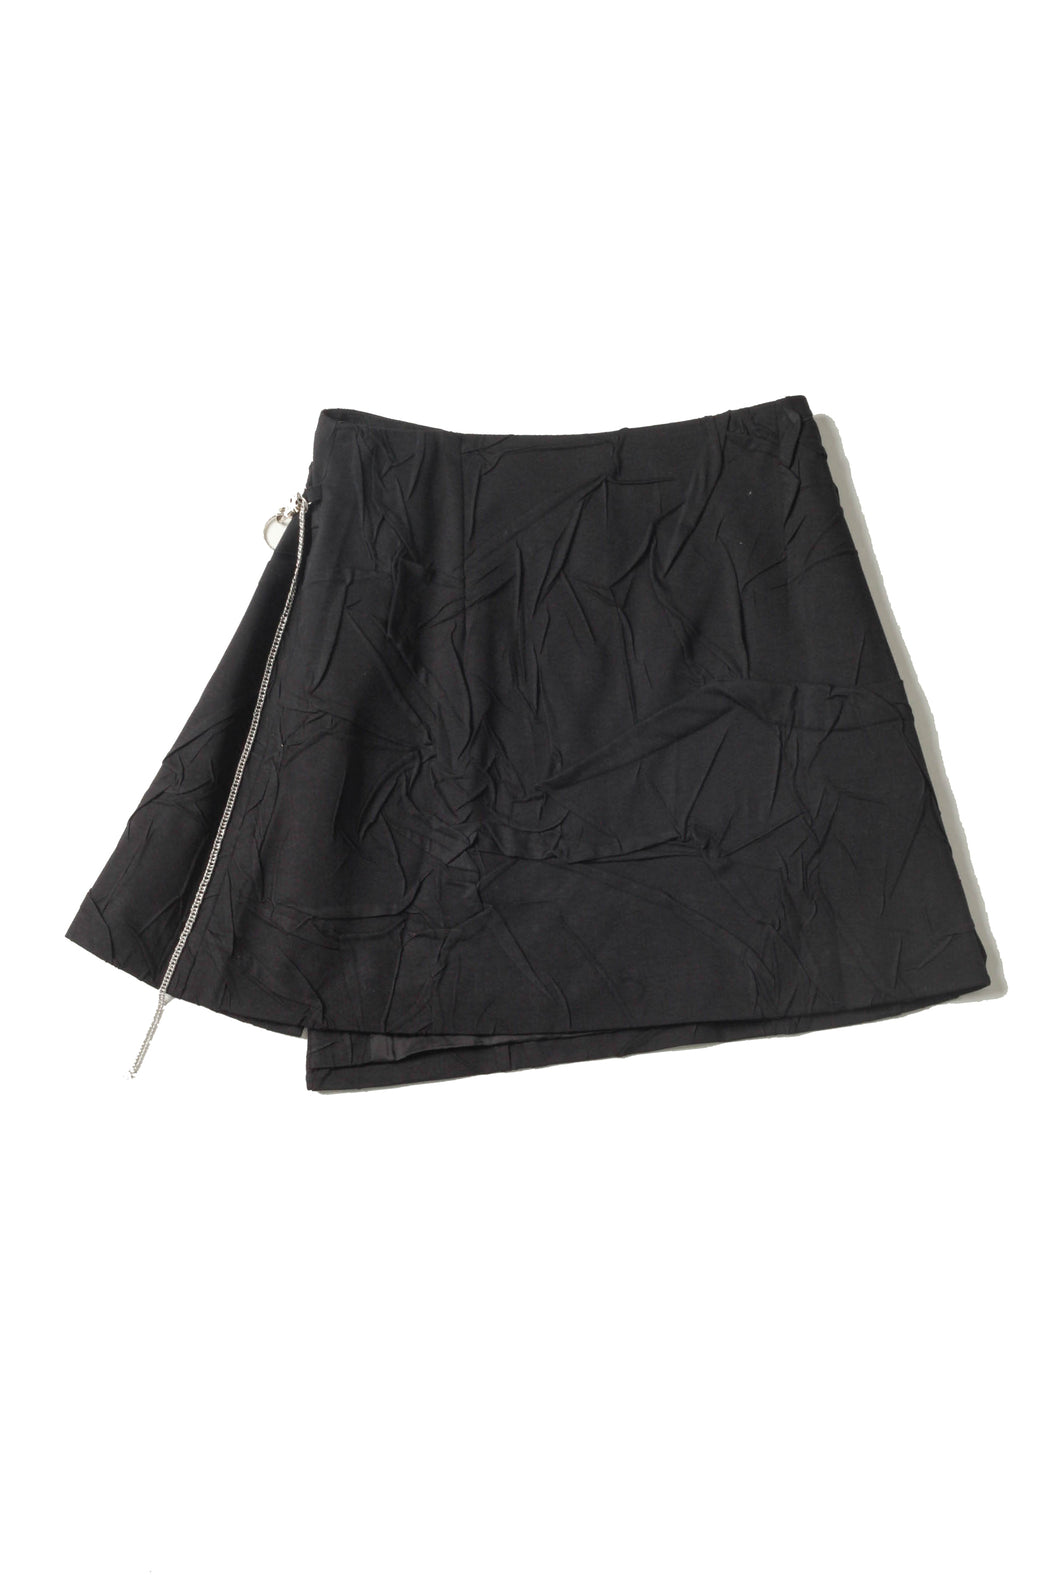 Madou - Black Double Sided Skirt